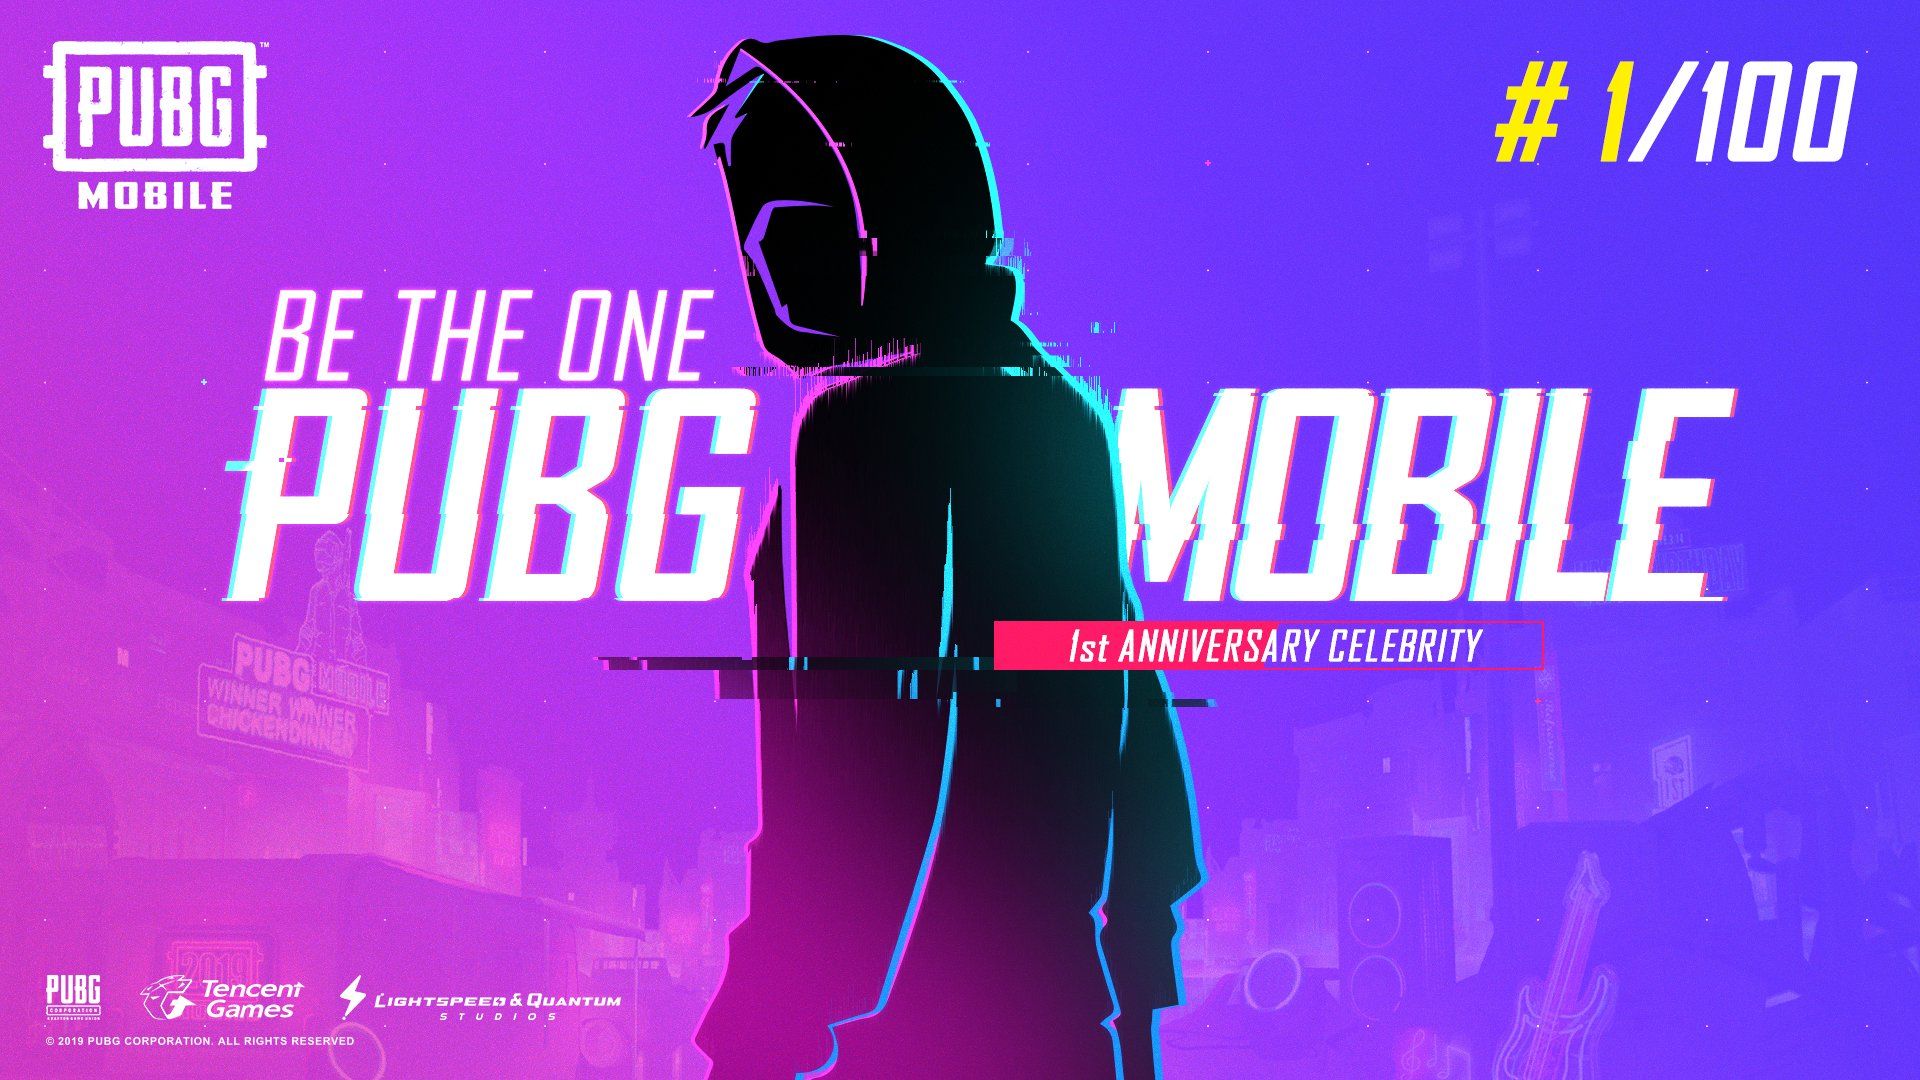 PUBG MOBILE INDIA secret guest has been invited to